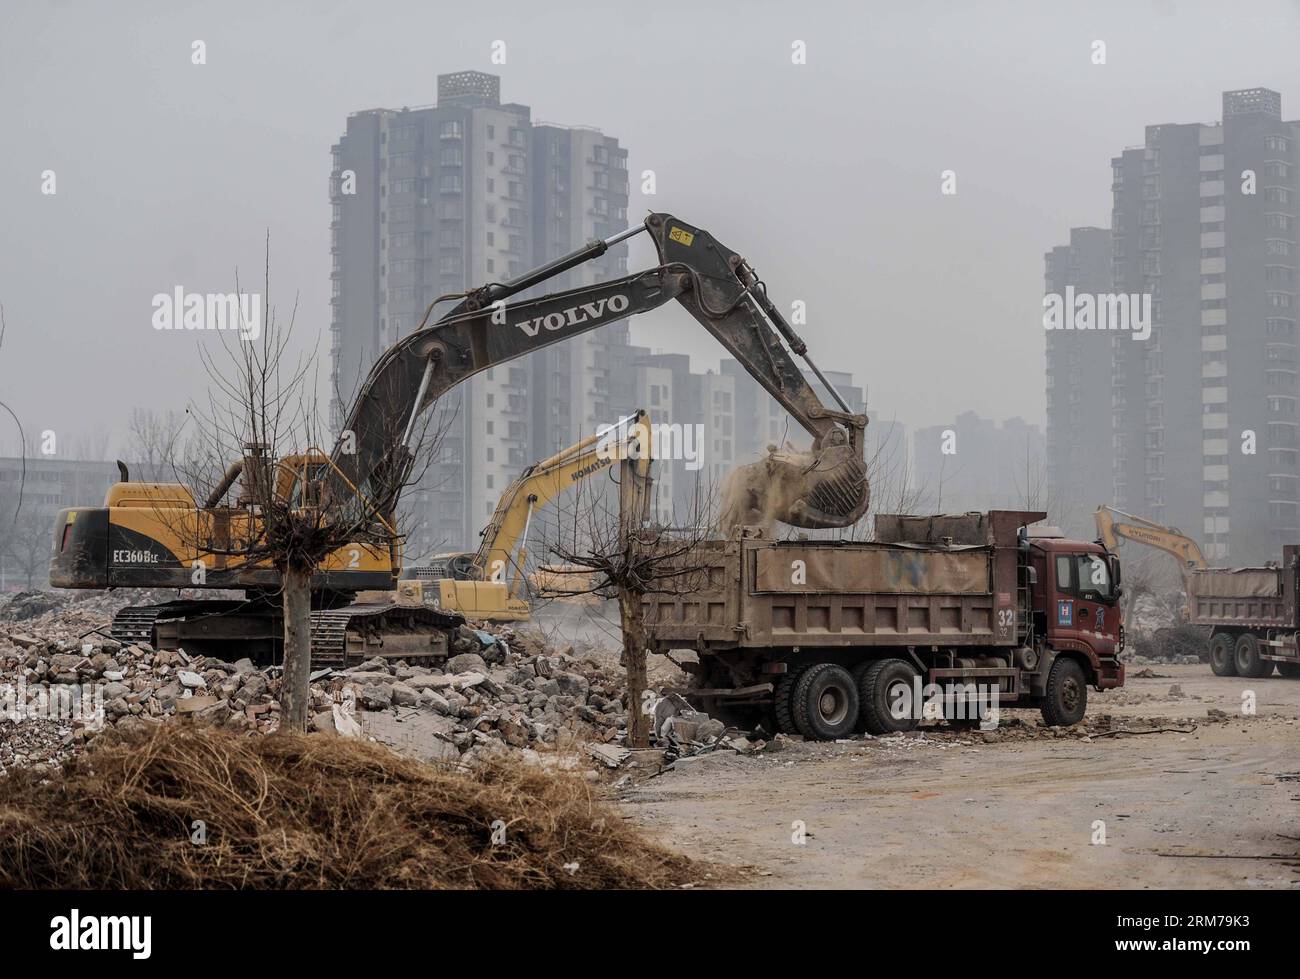 (140220) -- BEIJING, Feb. 20, 2014 (Xinhua) -- An excavator works on ruins of illegal houses demolished in Zhenggezhuang Village, Beiqijia Township of Changping District on the outskirt of Beijing, China, Feb. 20, 2014. Those illegal houses cover an area of 108.55 mu (about 7.24 hectares) , which will be used for tree planting after complete of demolition. (Xinhua/Luo Xiaoguang) (hdt) CHINA-BEIJING-CHANGPING-ILLEGAL HOUSES-DEMOLITION (CN) PUBLICATIONxNOTxINxCHN   Beijing Feb 20 2014 XINHUA to excavator Works ON Ruins of illegal Houses Demolished in  Village  Township of Chang Ping District ON Stock Photo